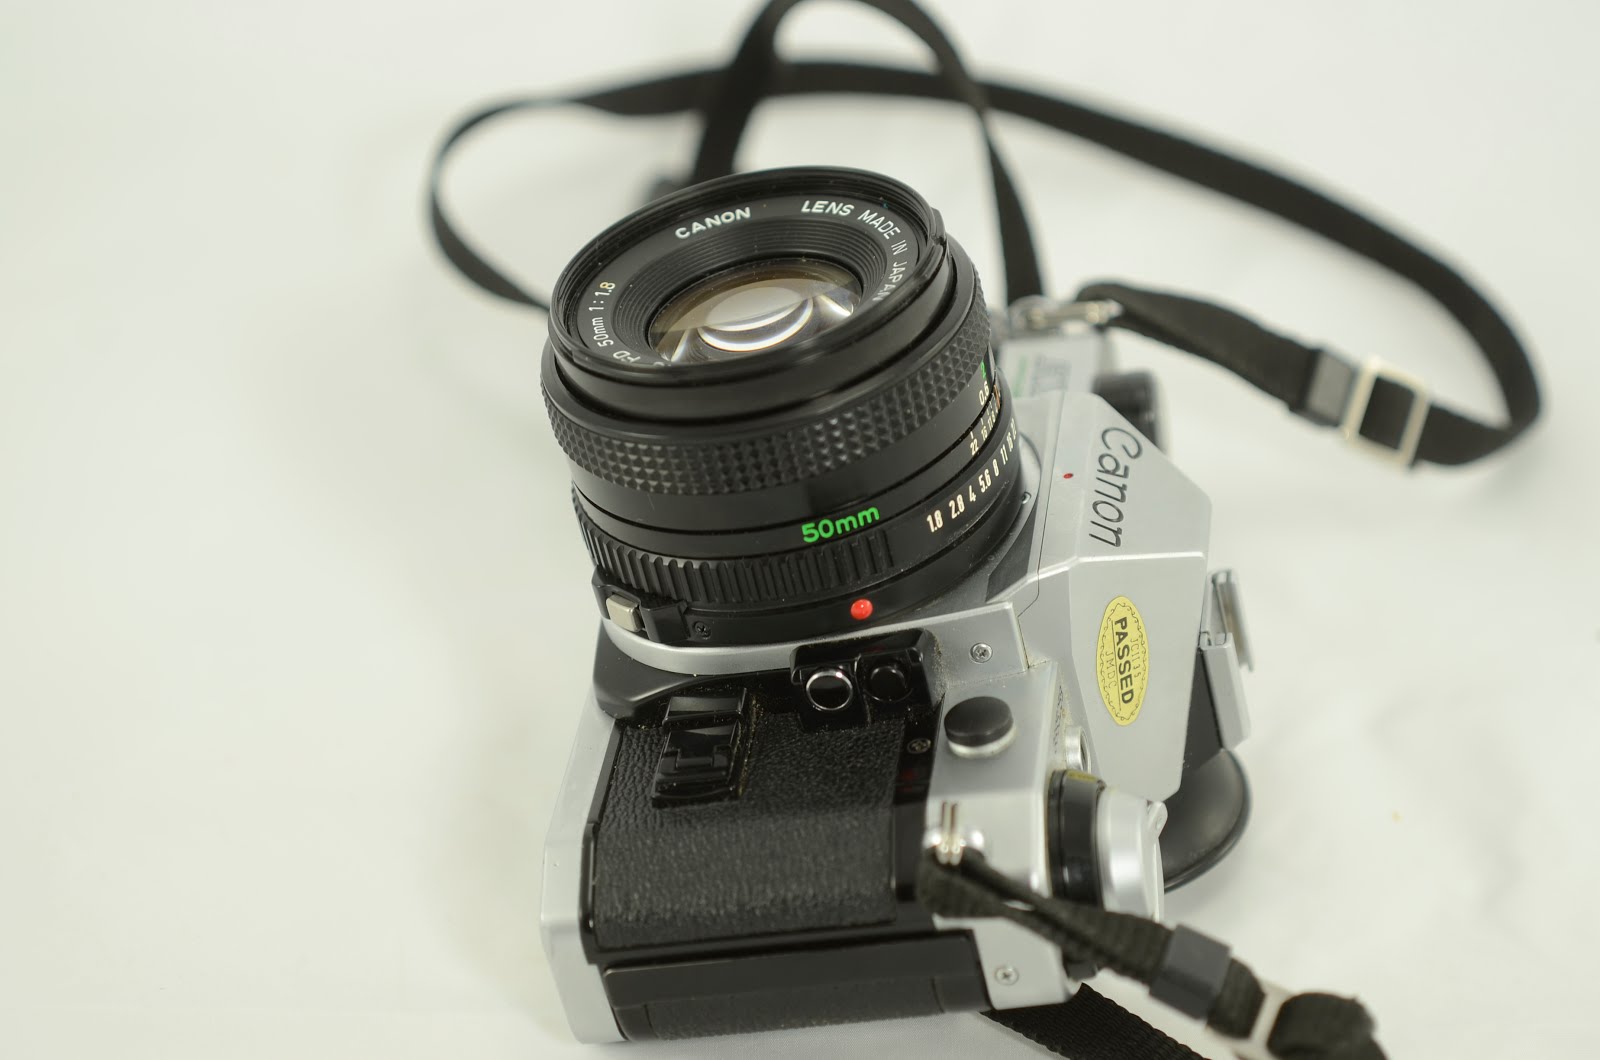 Vintage Camera House: Canon AE-1 Program and the kit lens FD 50mm 1.8